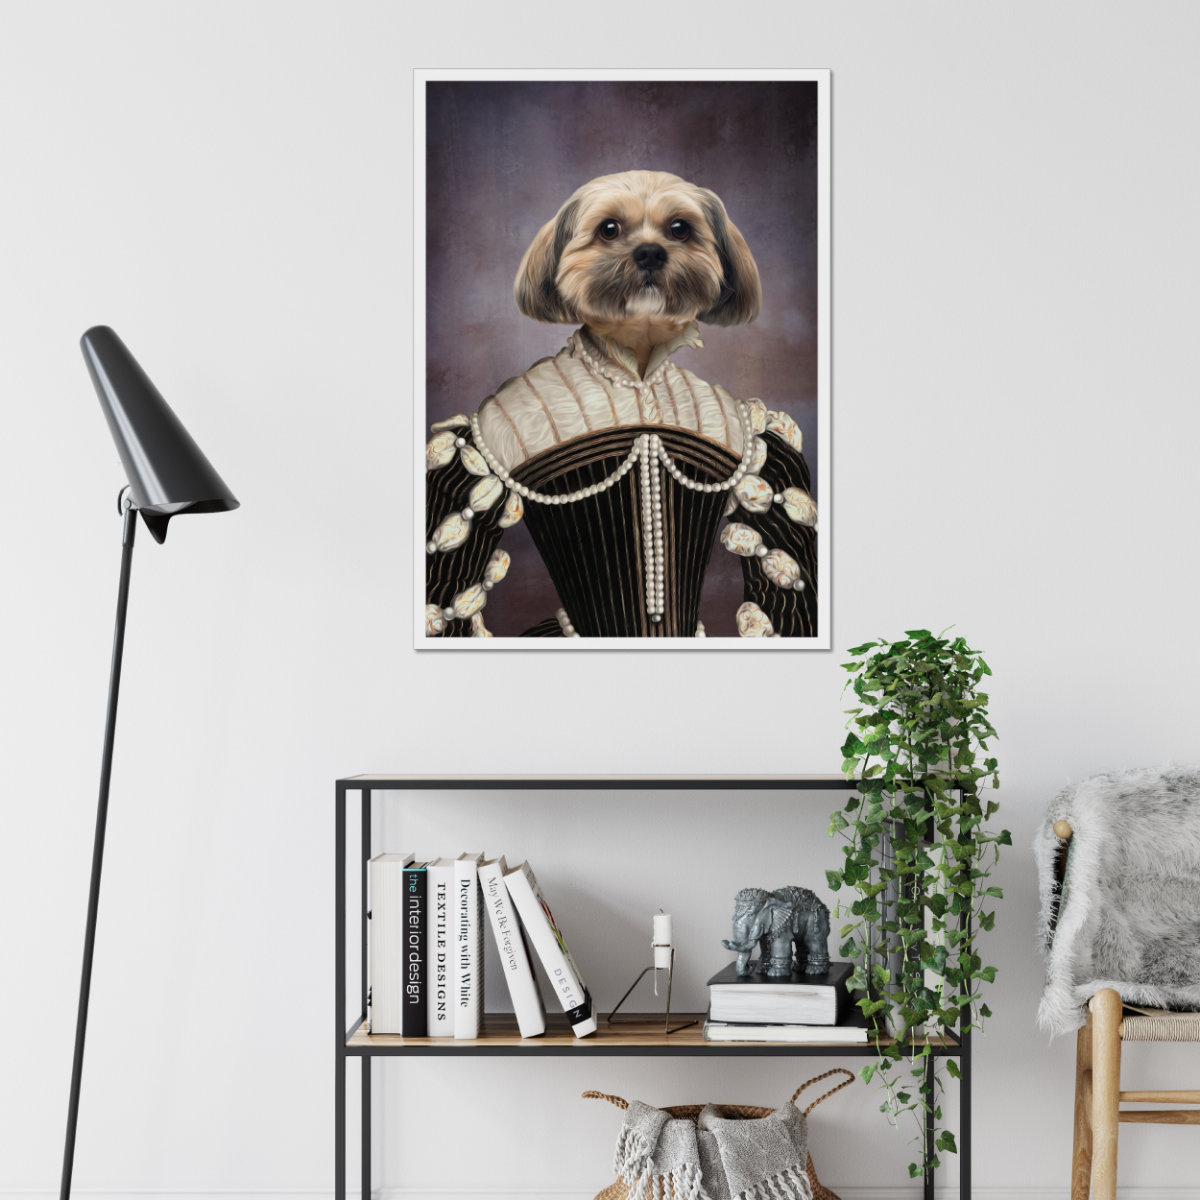 The Marquise: Custom Framed Pet Portrait  - Paw & Glory, paw and glory, pet portraits in oils, personalized pet and owner canvas, hogwarts dog houses, my pet painting, painting pets, aristocrat dog painting, pet portrait